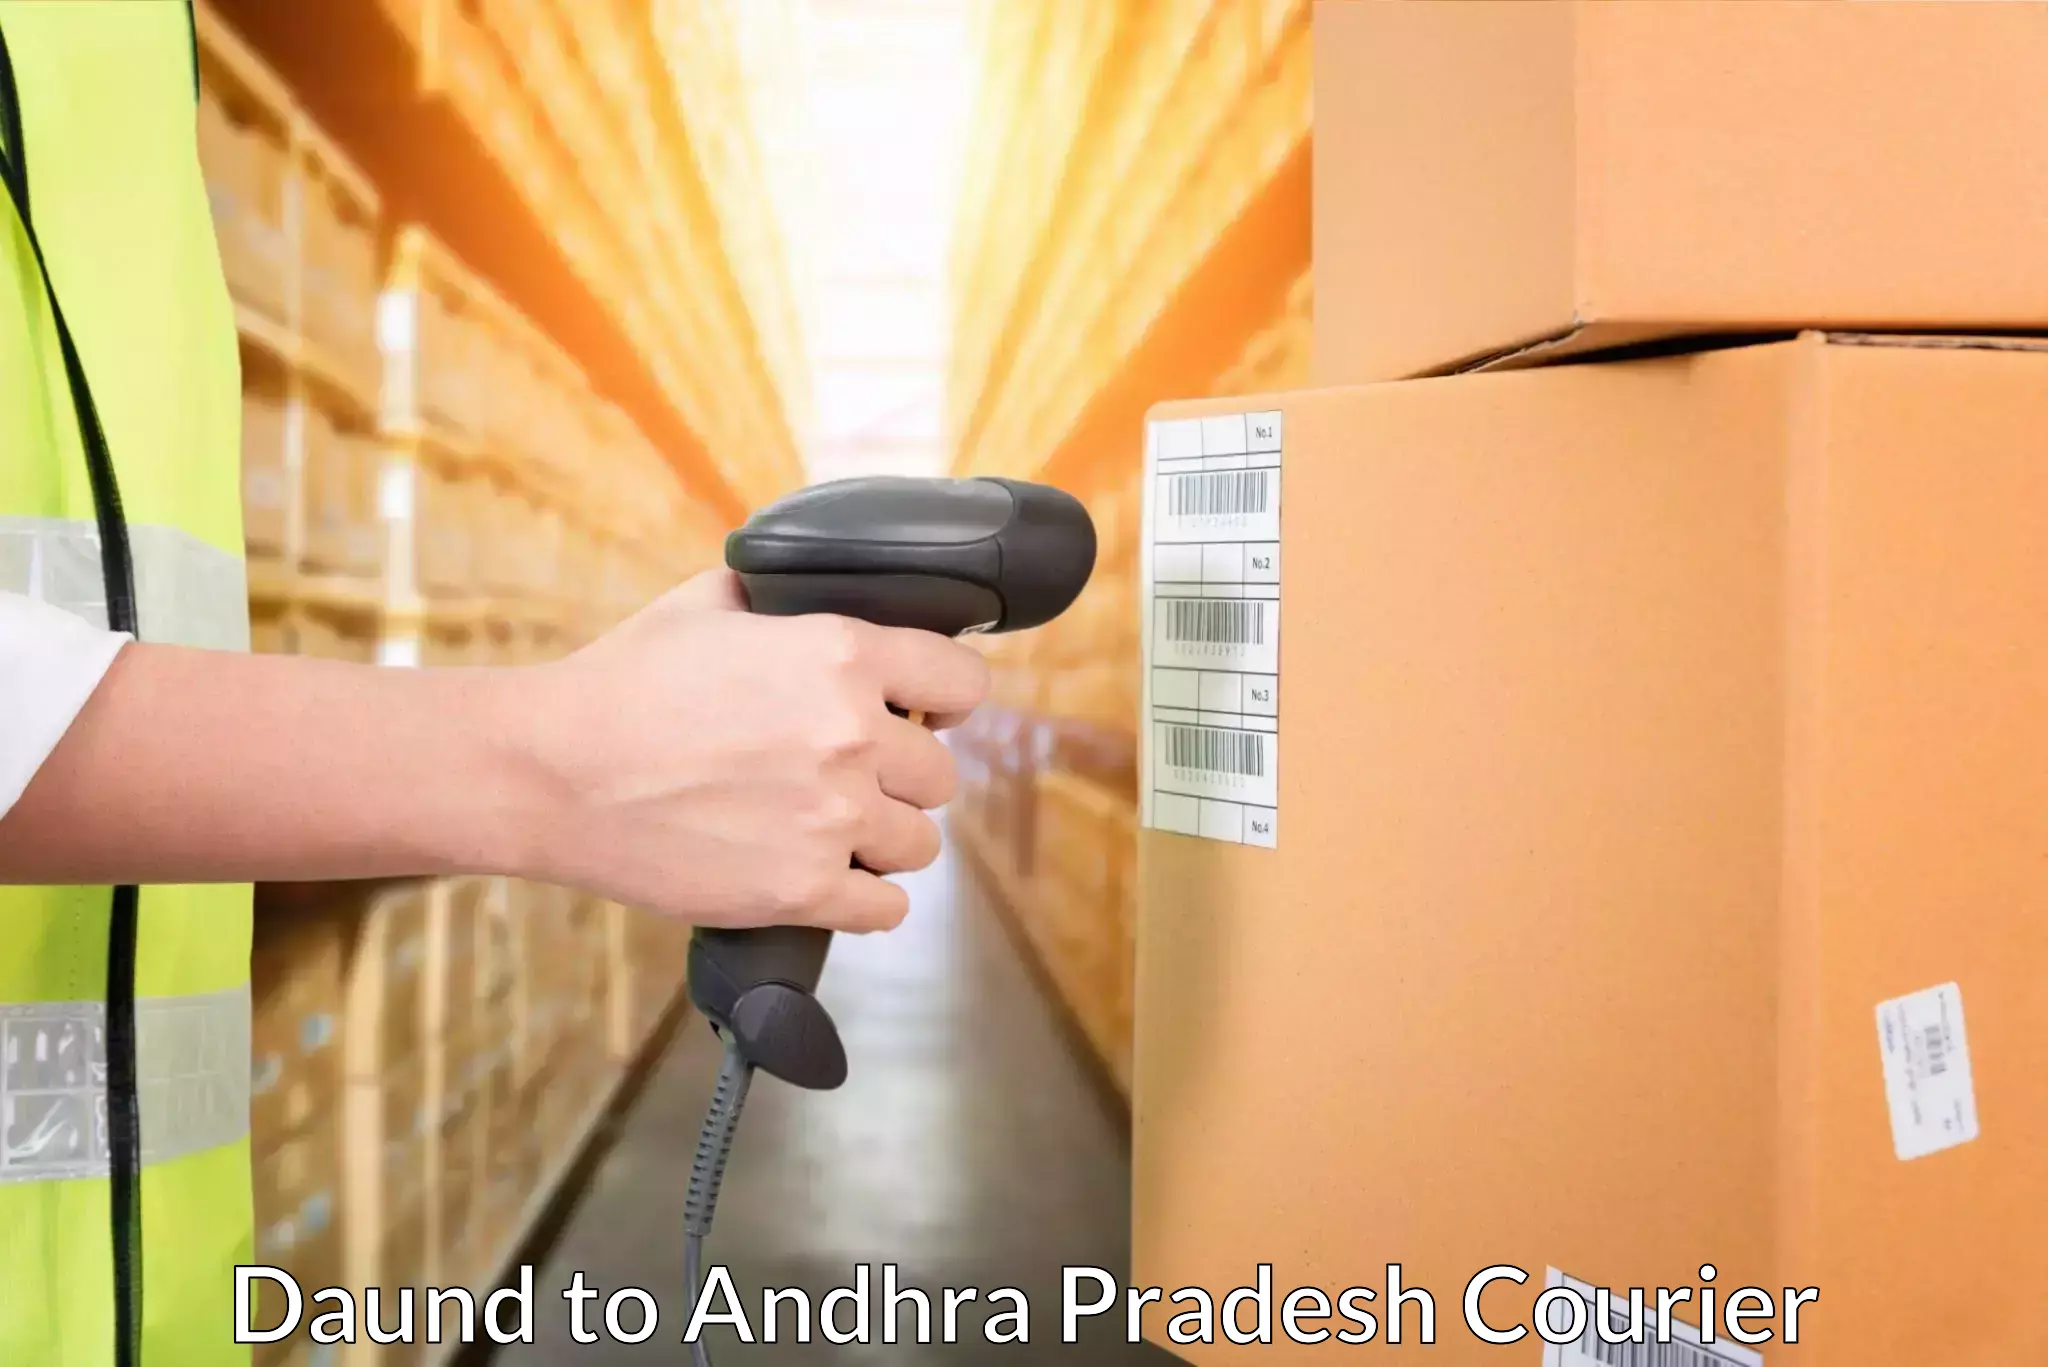 Courier insurance in Daund to Adoni